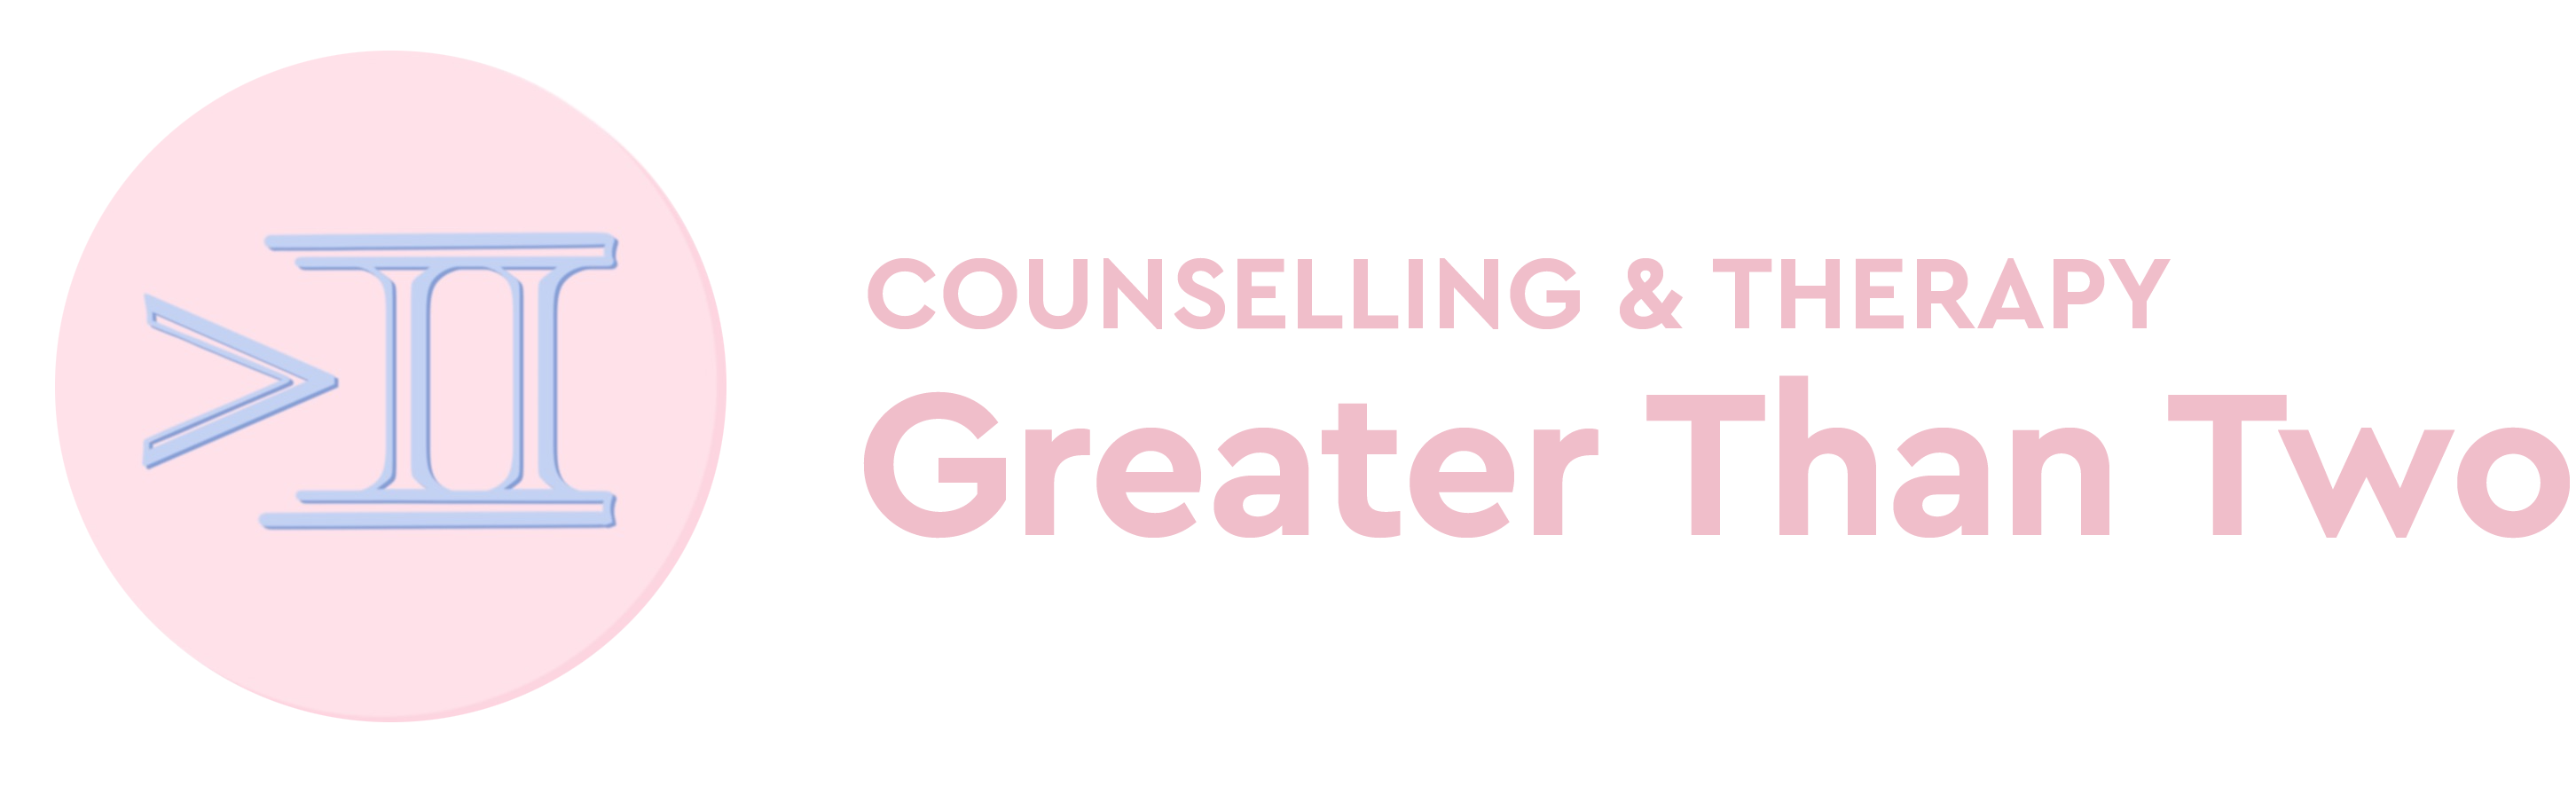 Greater Than Two: Counselling & Therapy